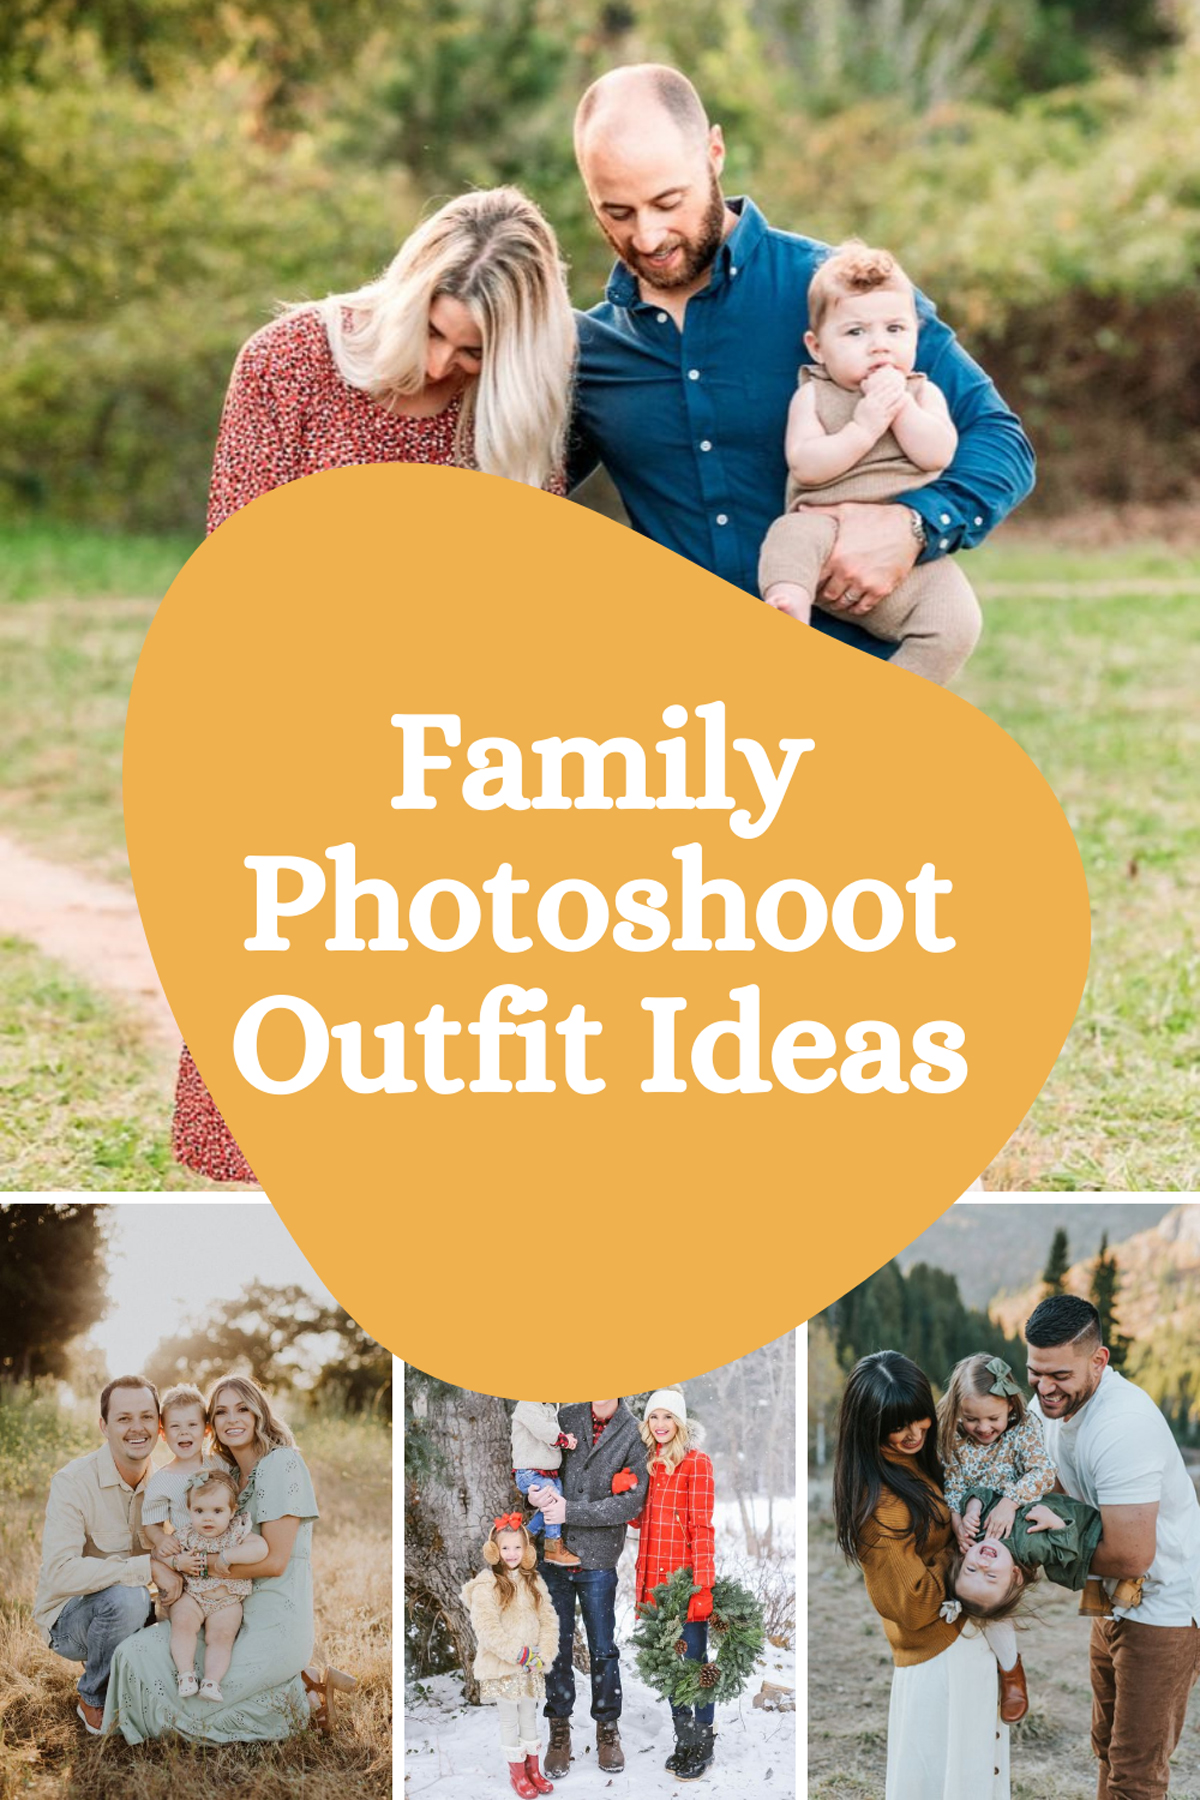 Tips for Choosing Clothes for Photos